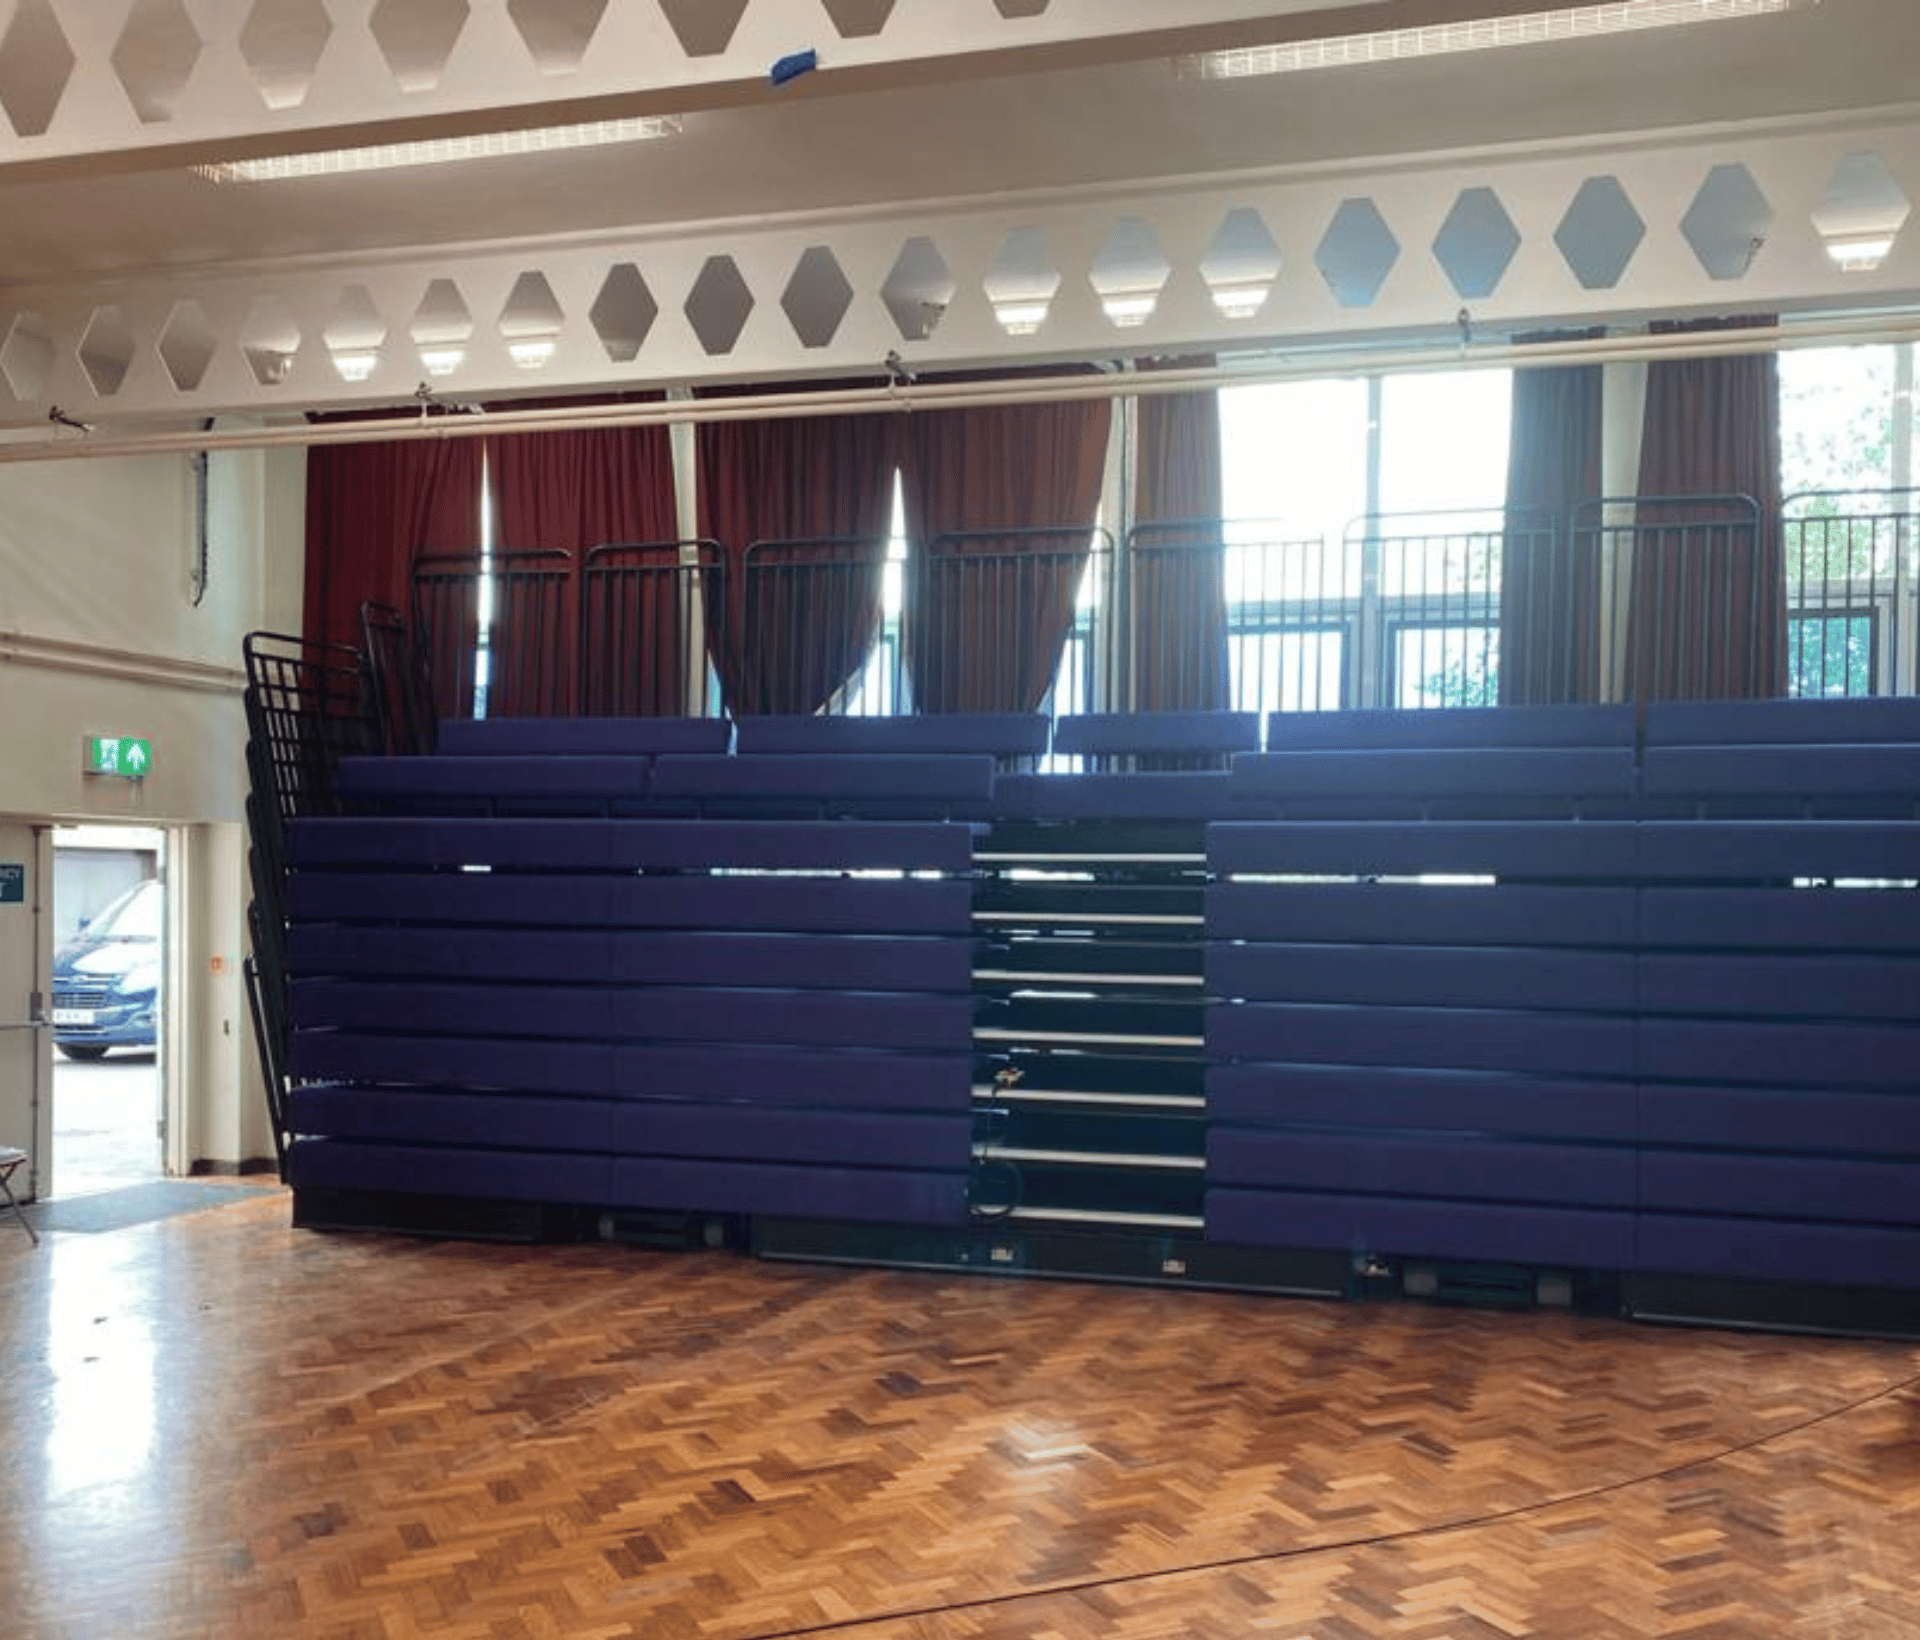 A wooden floor in a gymnasium with retractable seating stacked up